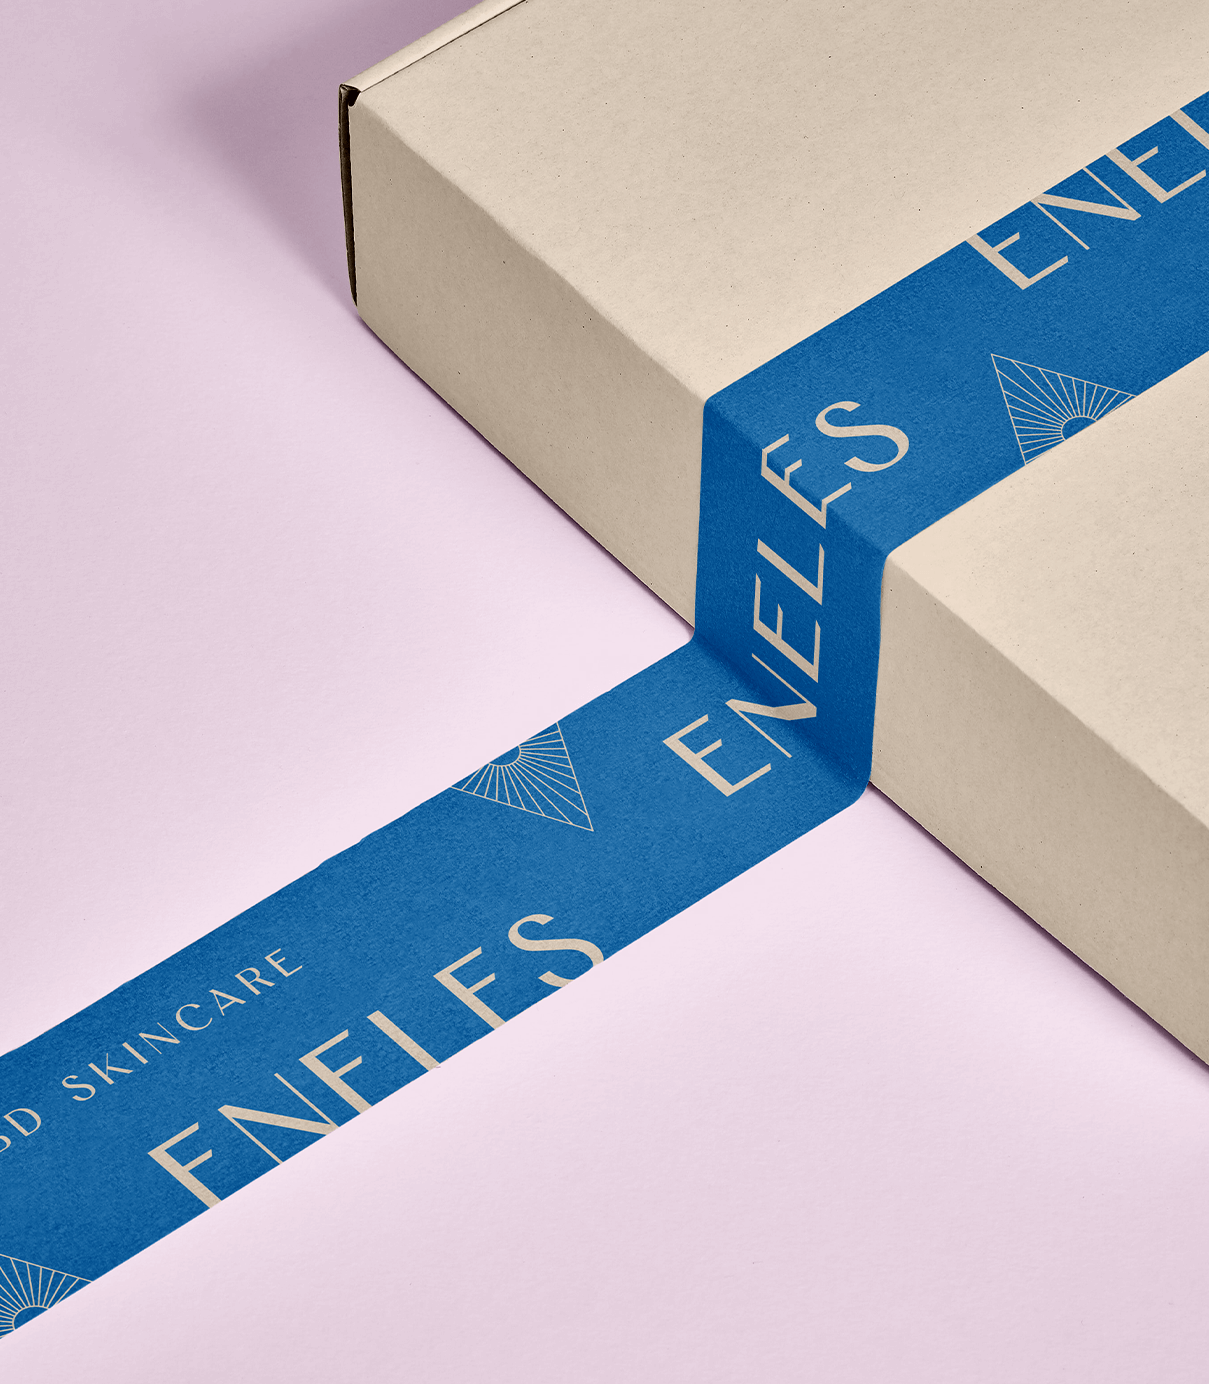 Branded tape on box mockup with logos and icons on blue background